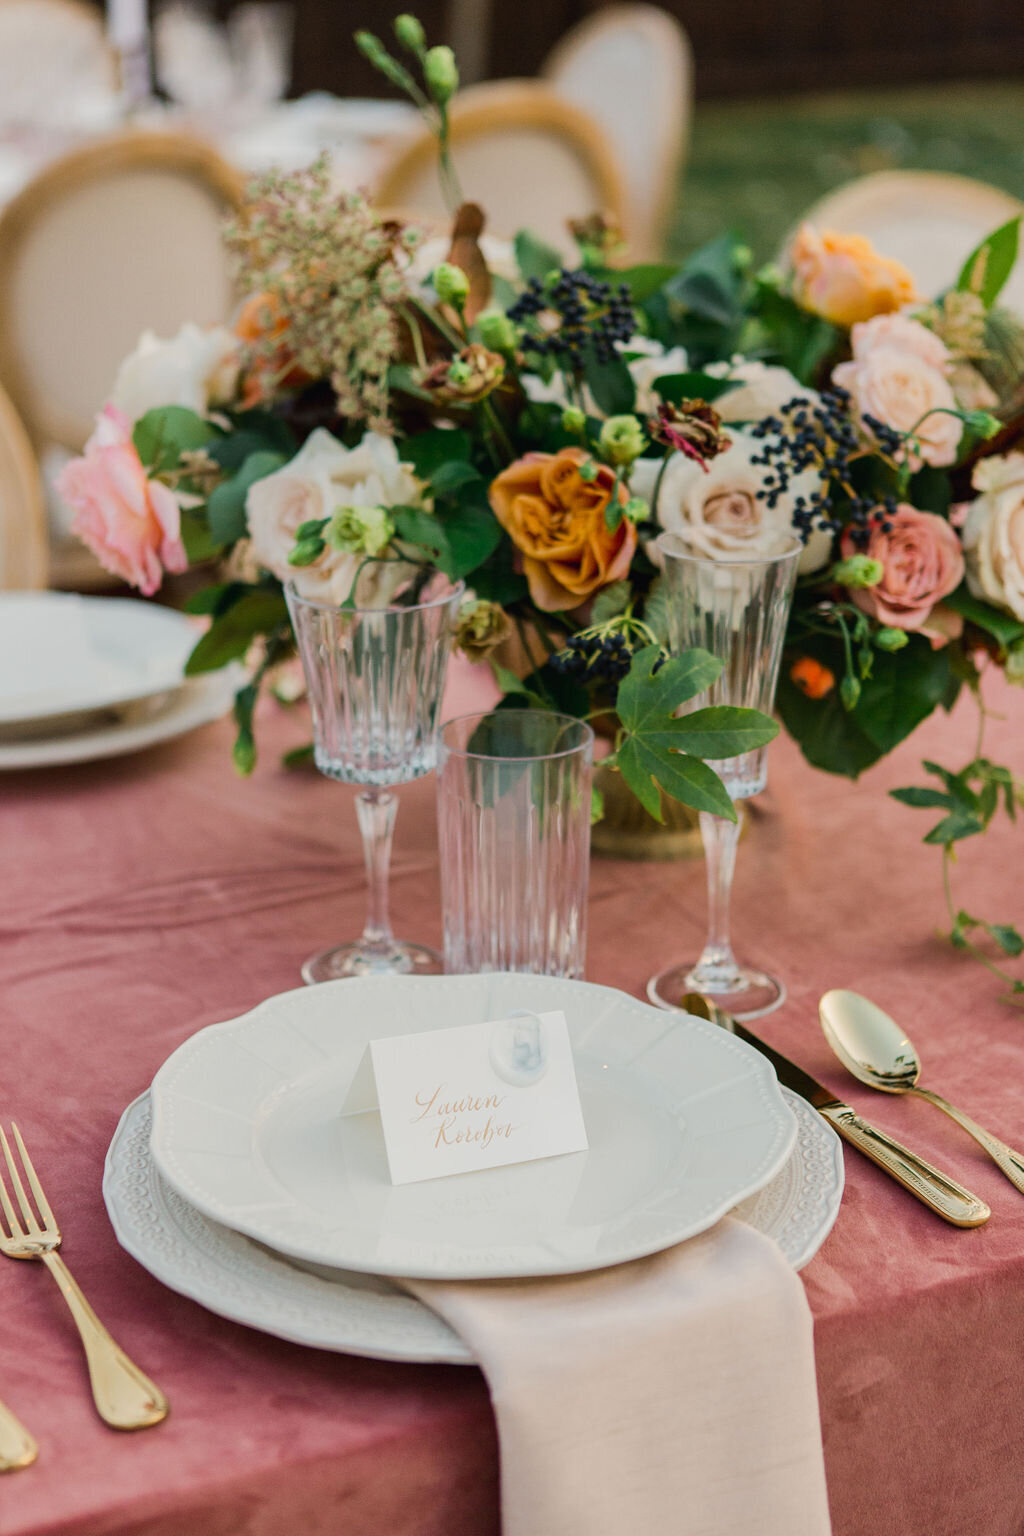 Intimate backyard wedding in Dallas Forth Worth, Texas tablescape with beautiful wedding florals | Vella Nest Floral Design